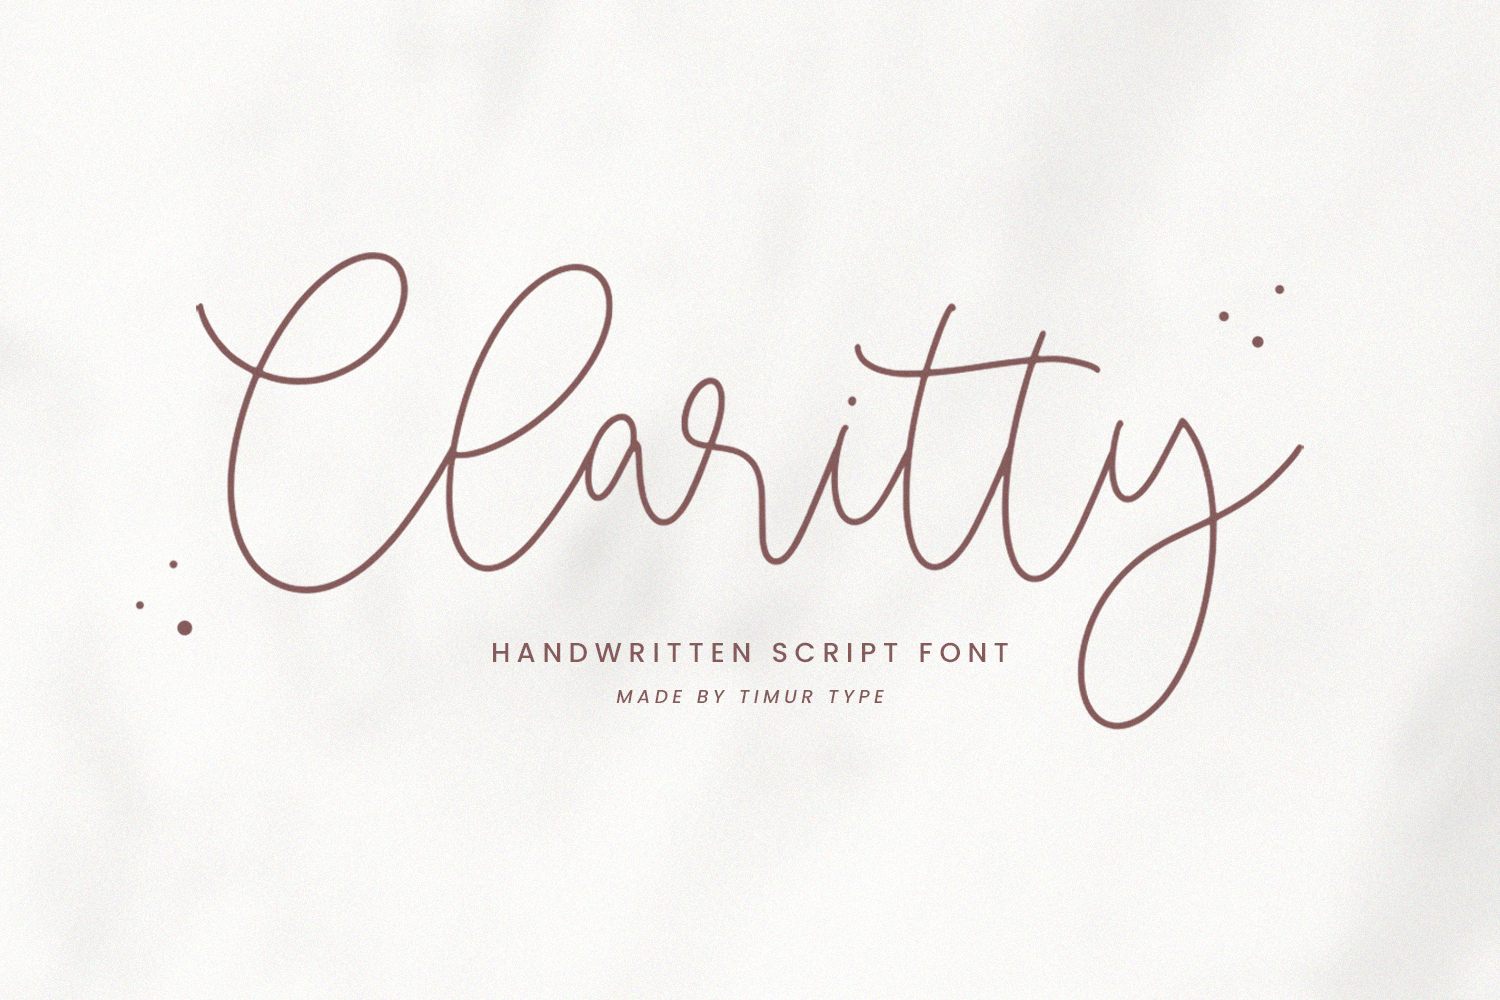 Claritty Free Font